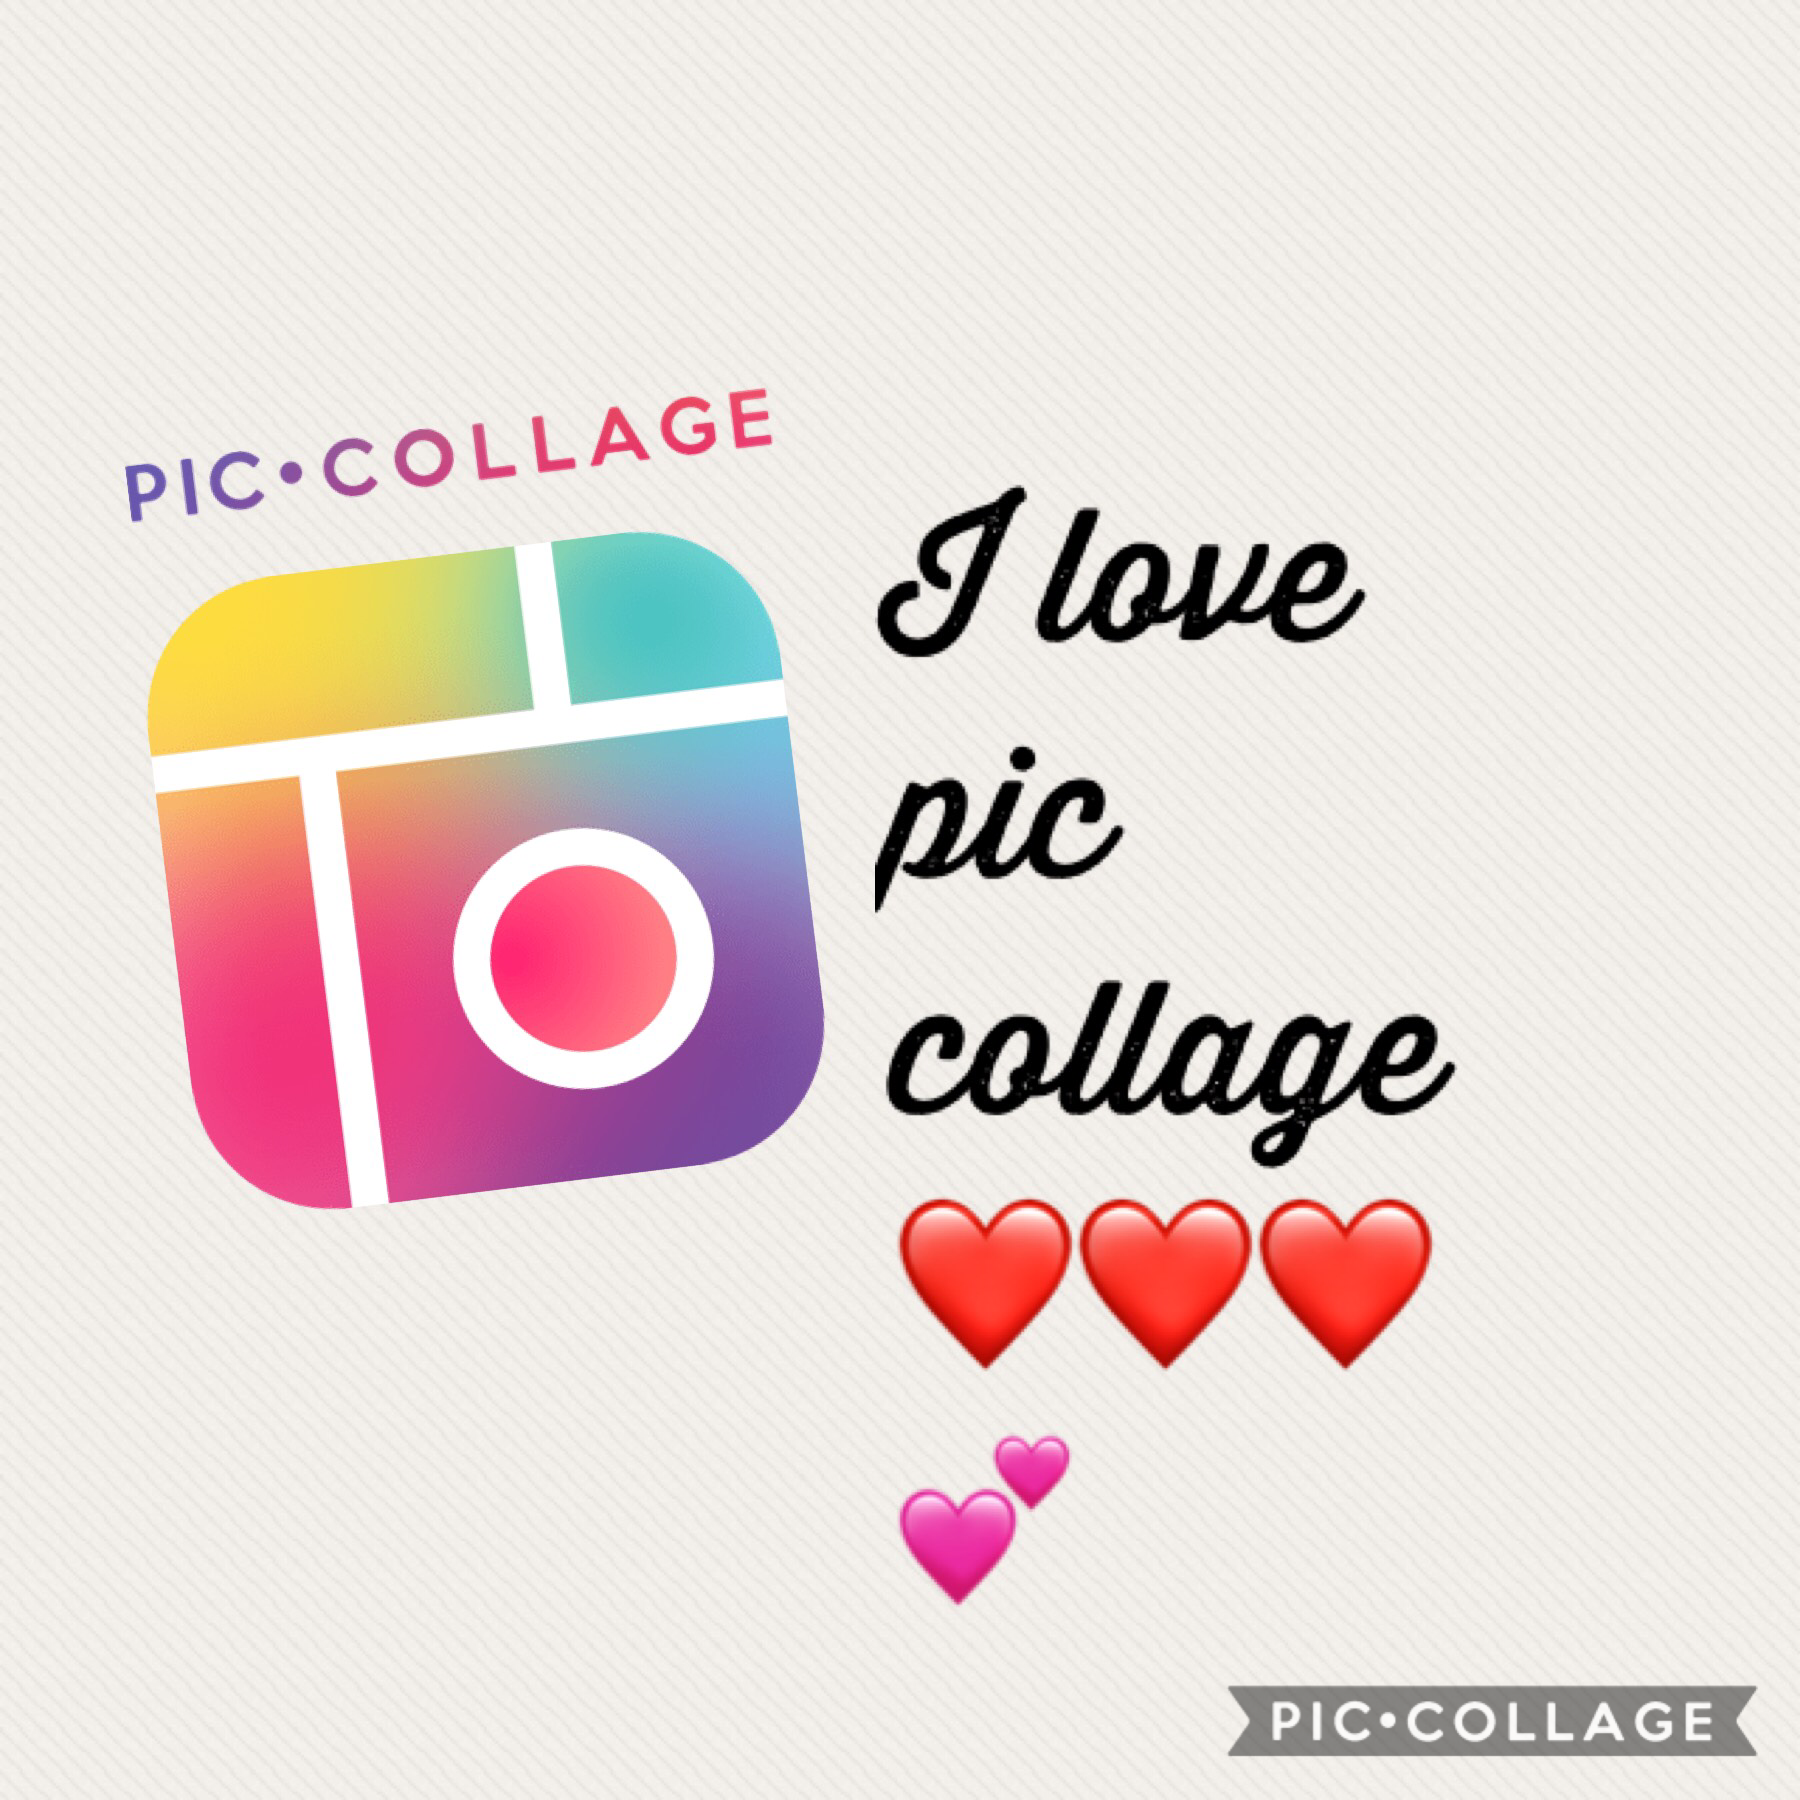 I love pic collage it is the best ❤️❤️❤️